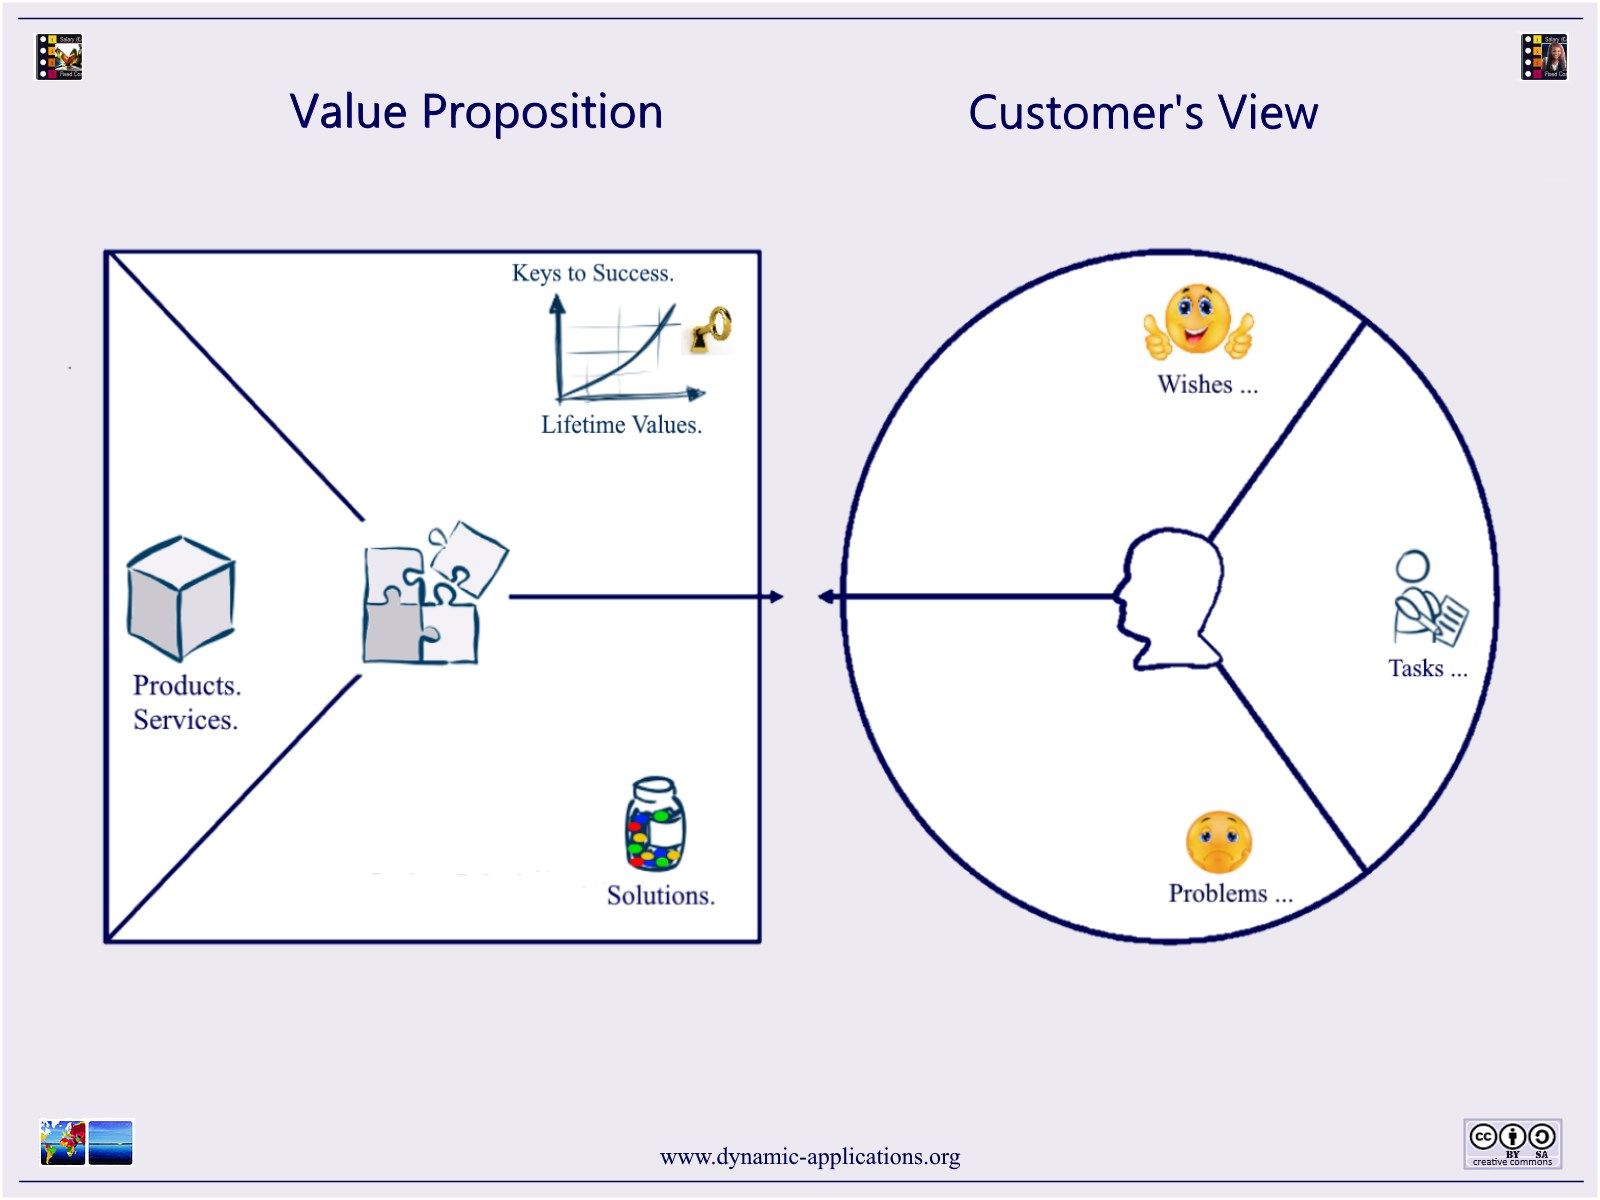 Value Proposition Canvas - calculate your offering in Lifetime Value (€$&/Hour).